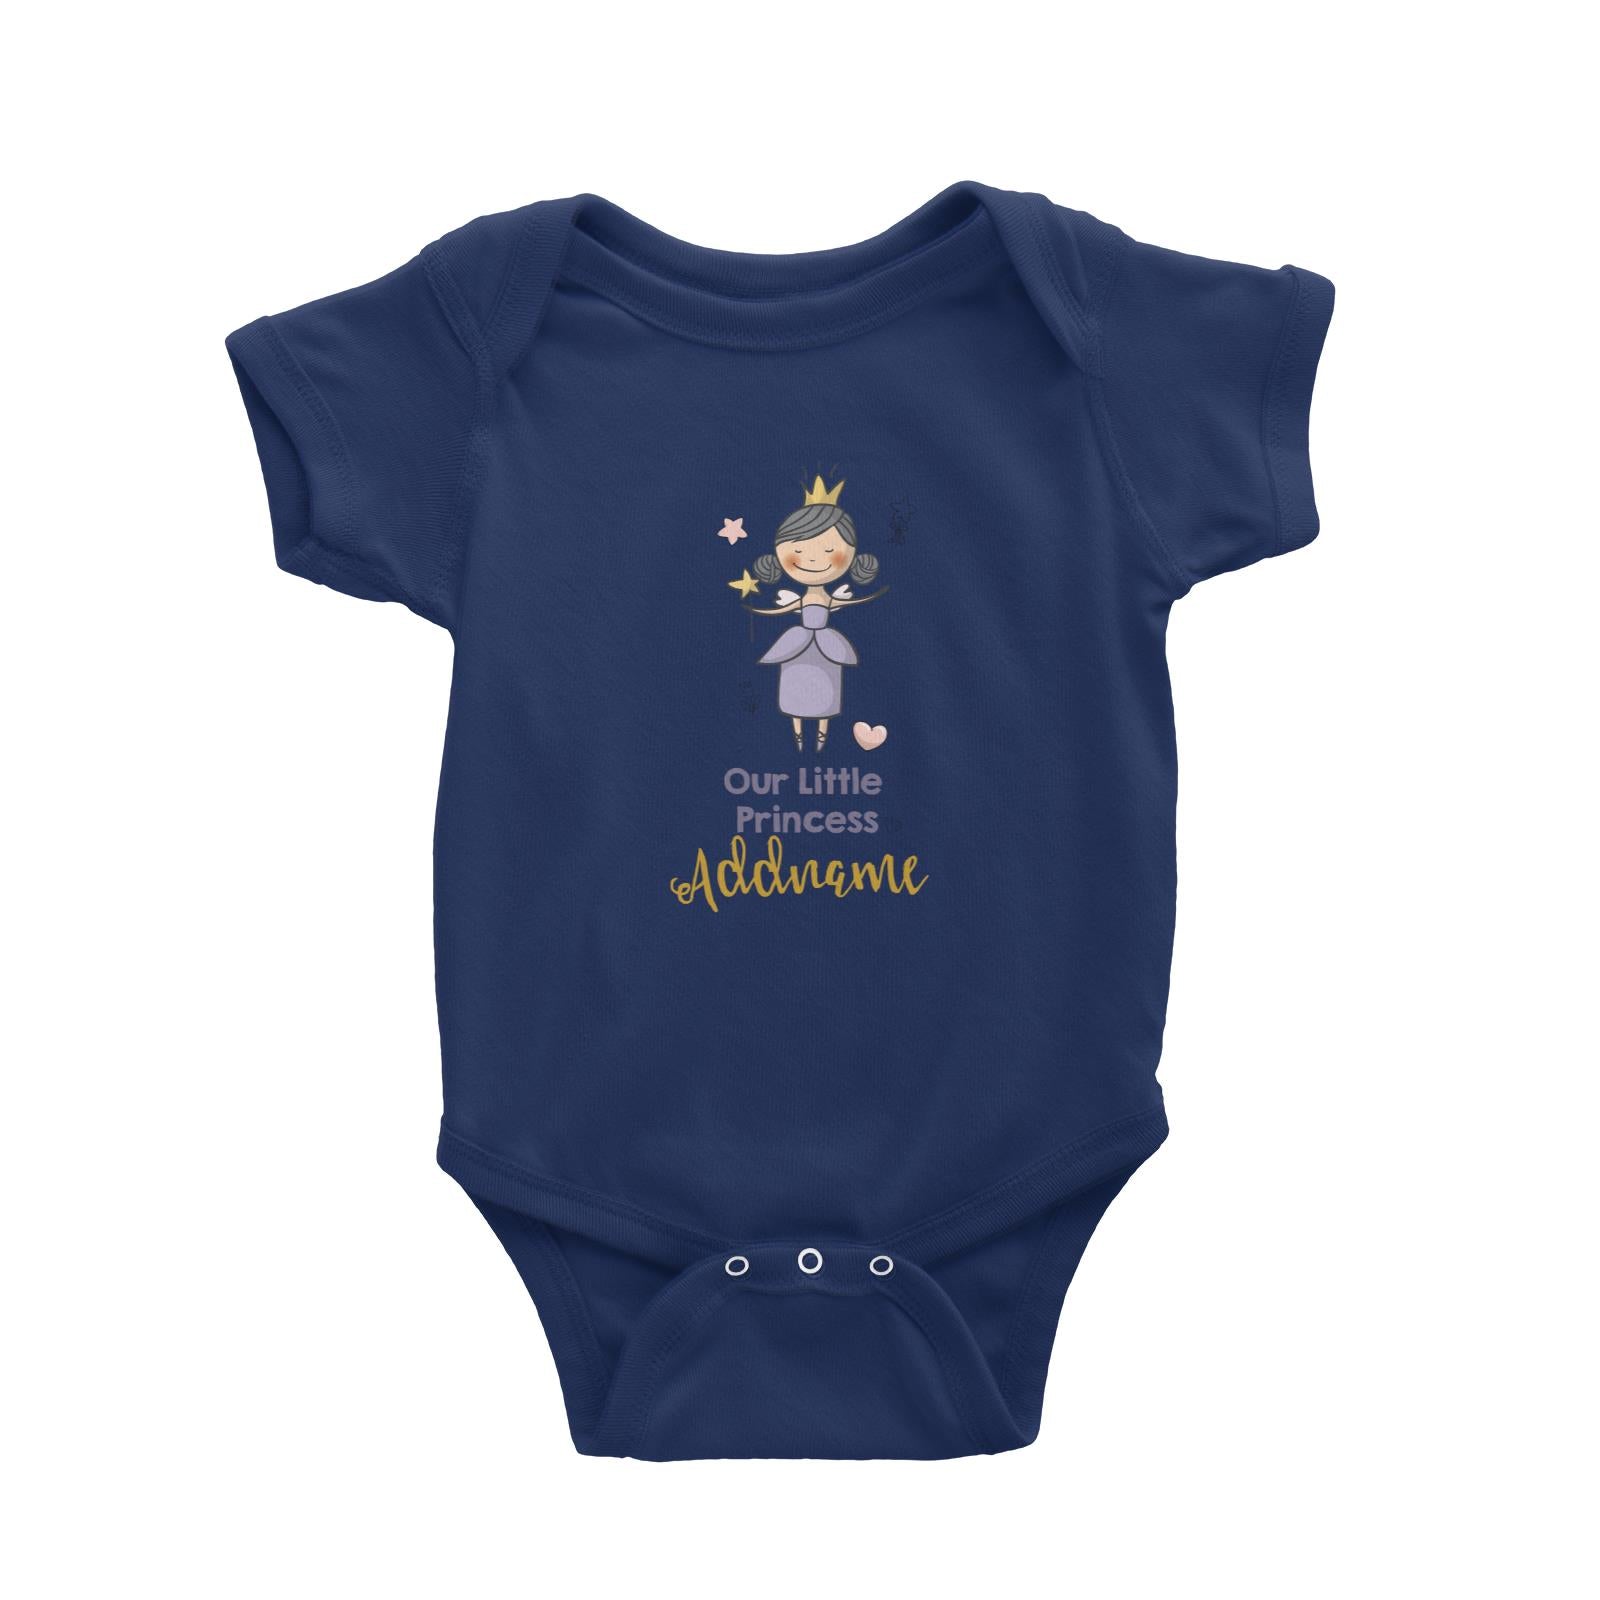 Our Little Princess in Purple Dress with Addname Baby Romper